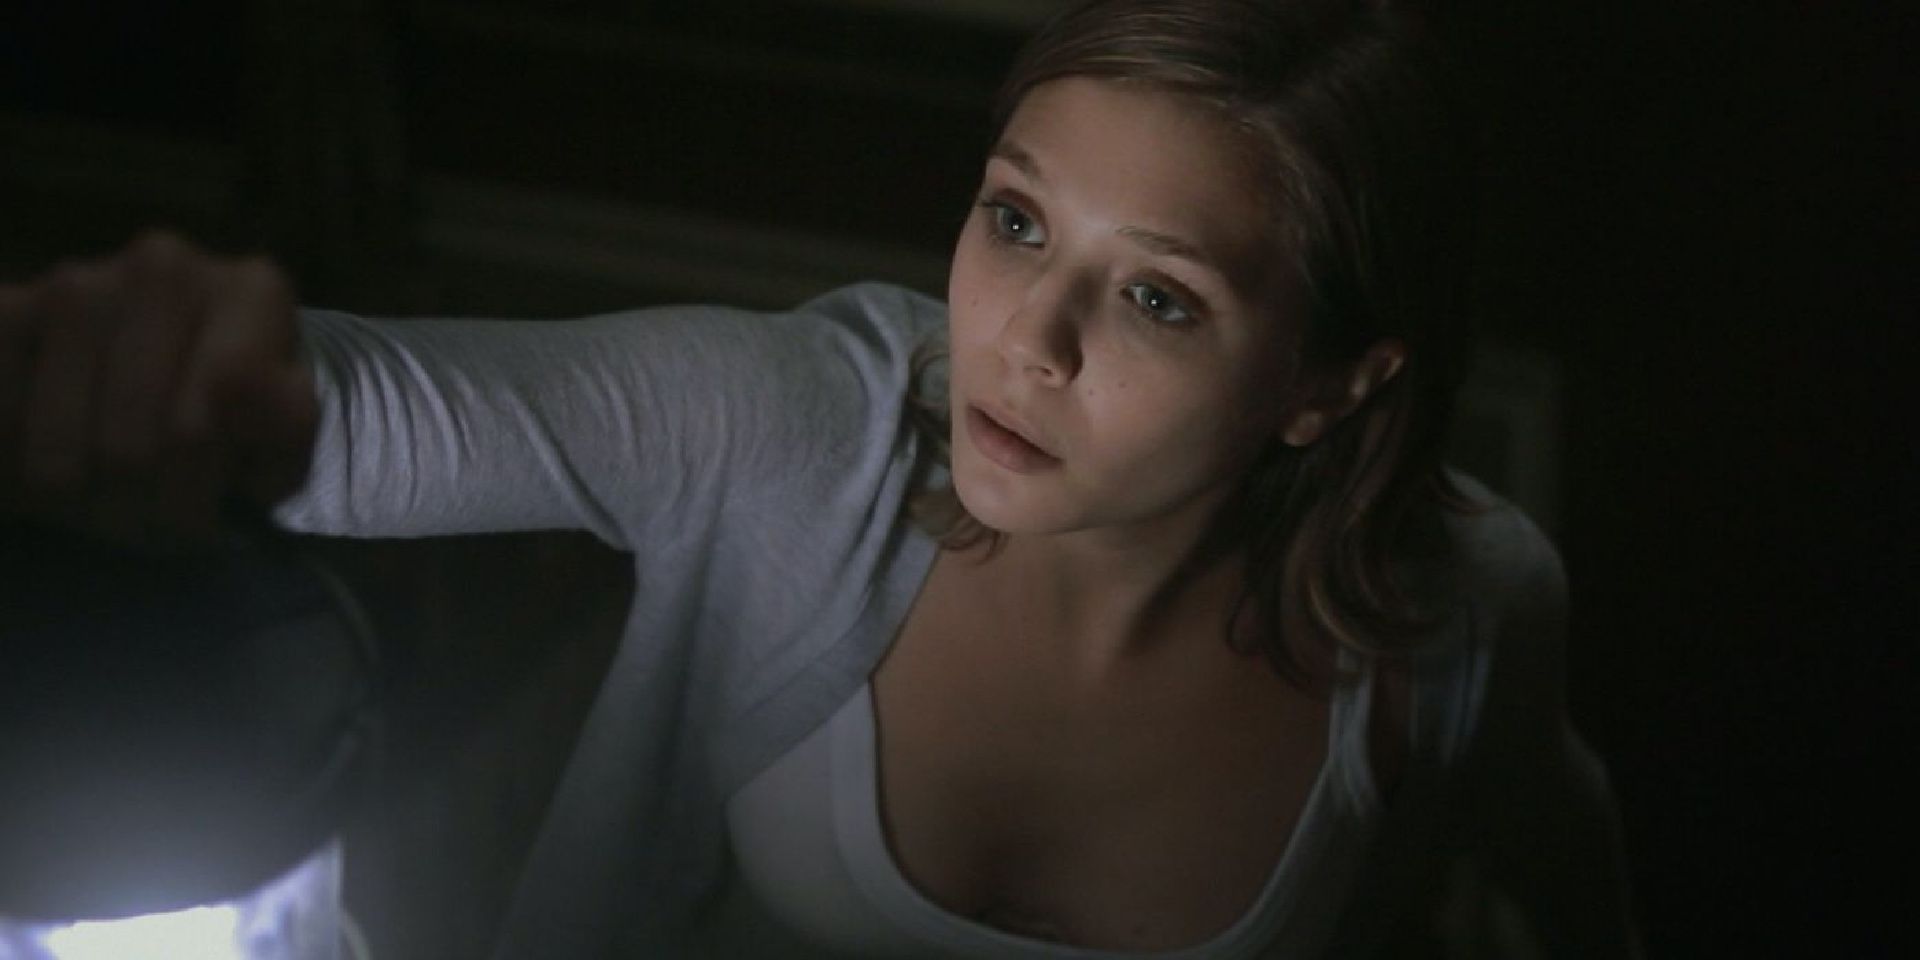 Sarah uses a lantern during a black out in the horror film Silent House